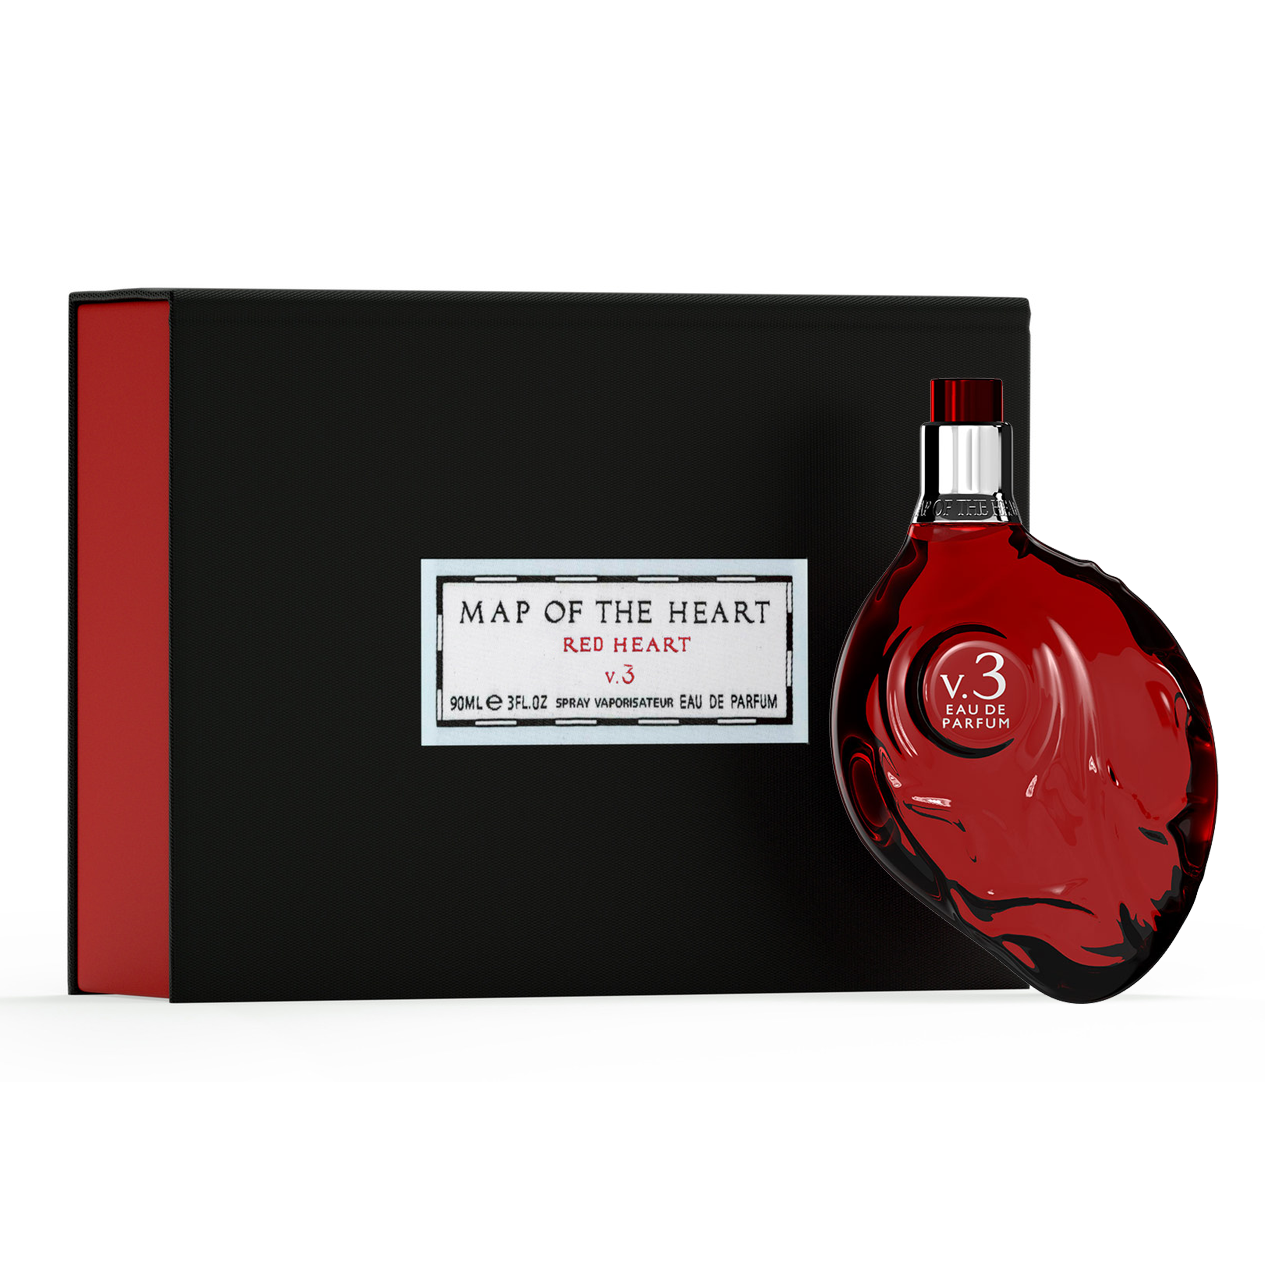 Map of the Heart Red heart perfume V.3 anatomical heart bottle - signature